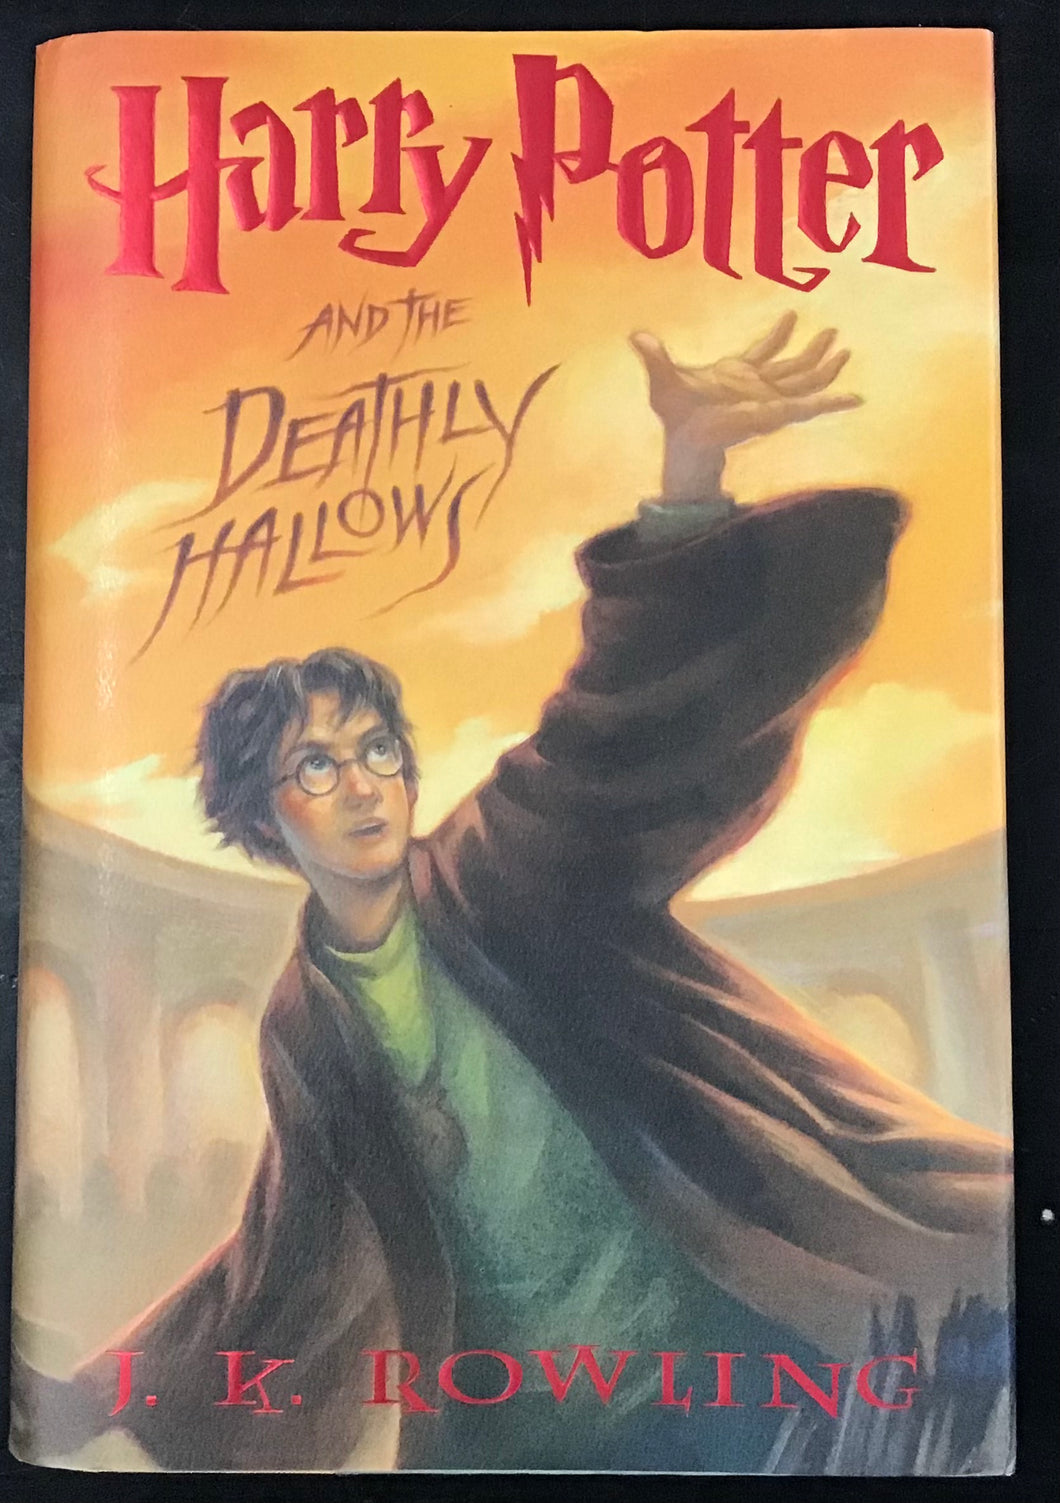 Harry Potter And The Deathly Hallows, J.K. Rowling